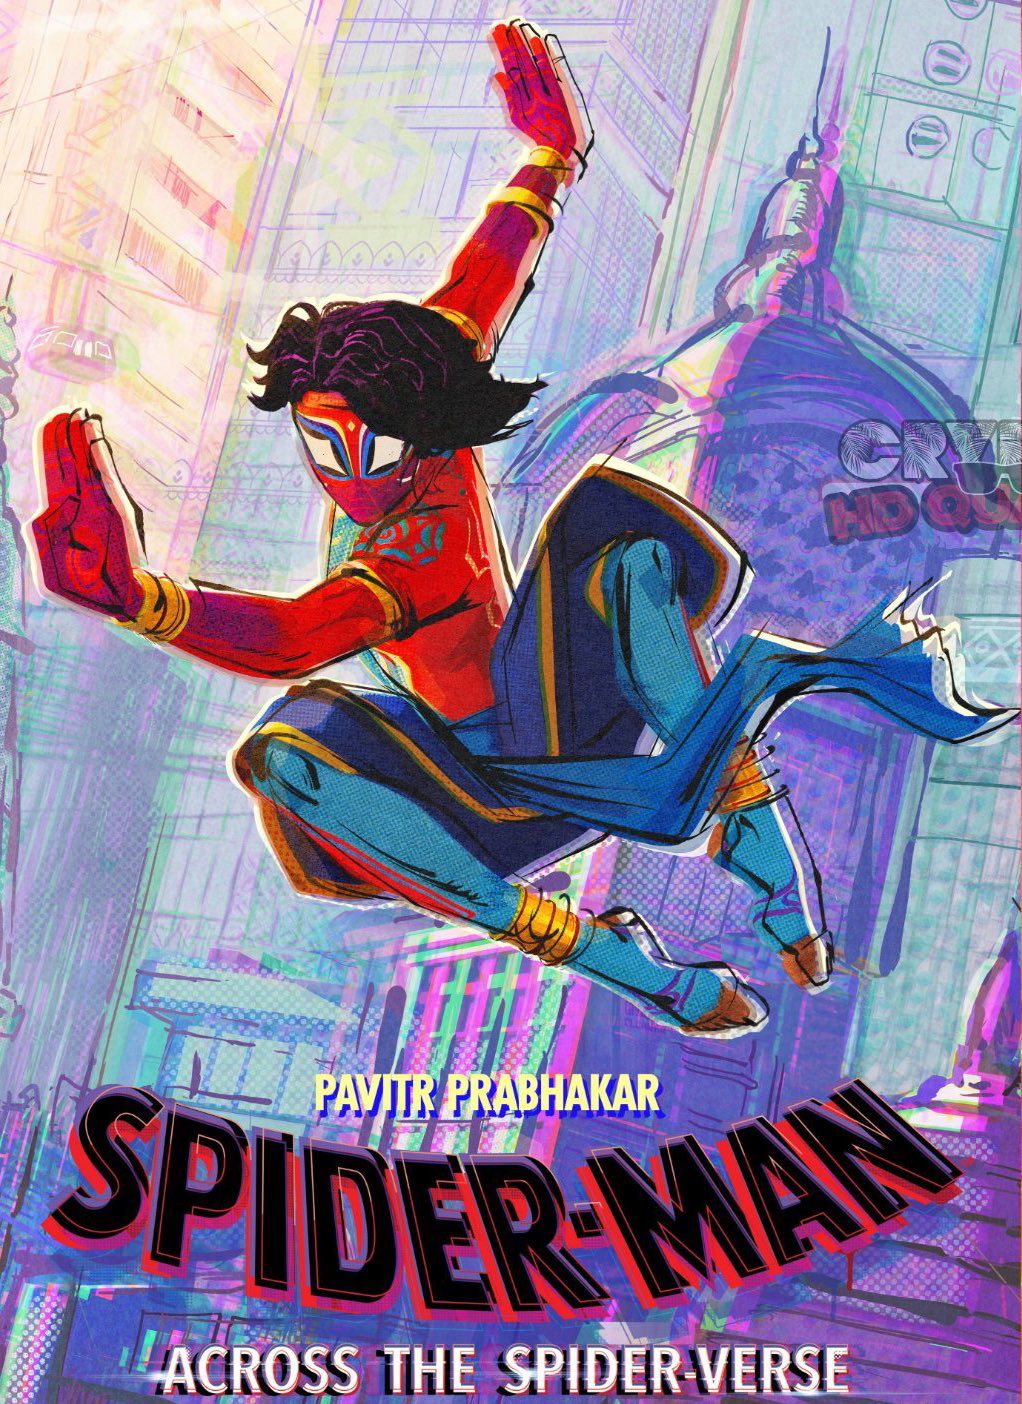 Spider-Man: Across the Spider Verse’ all set to get unveiled in India